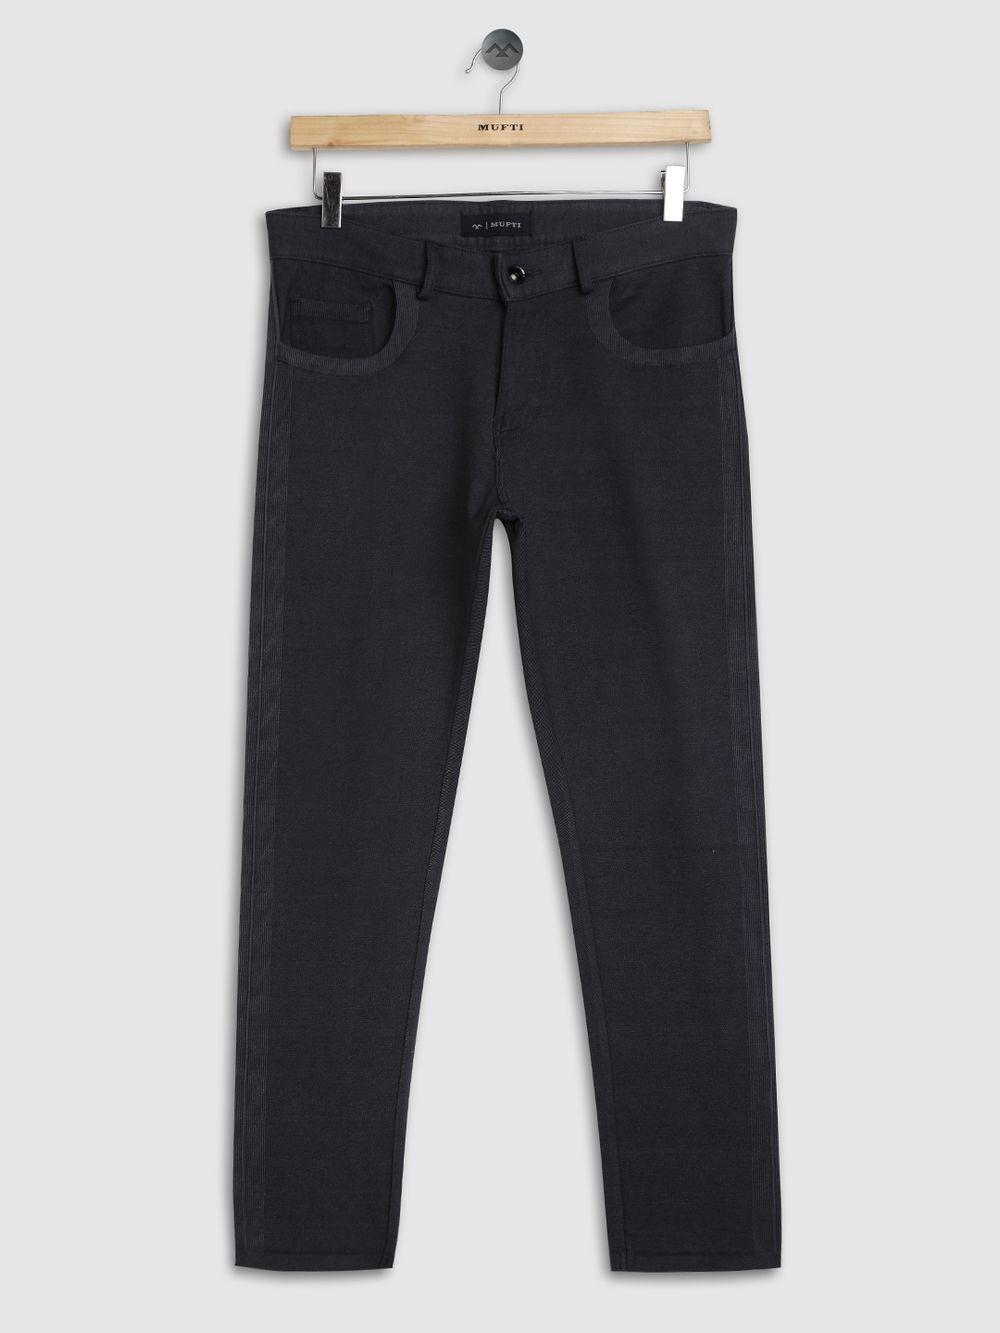 Grey Ankle Length Stretch Cotton Jeans